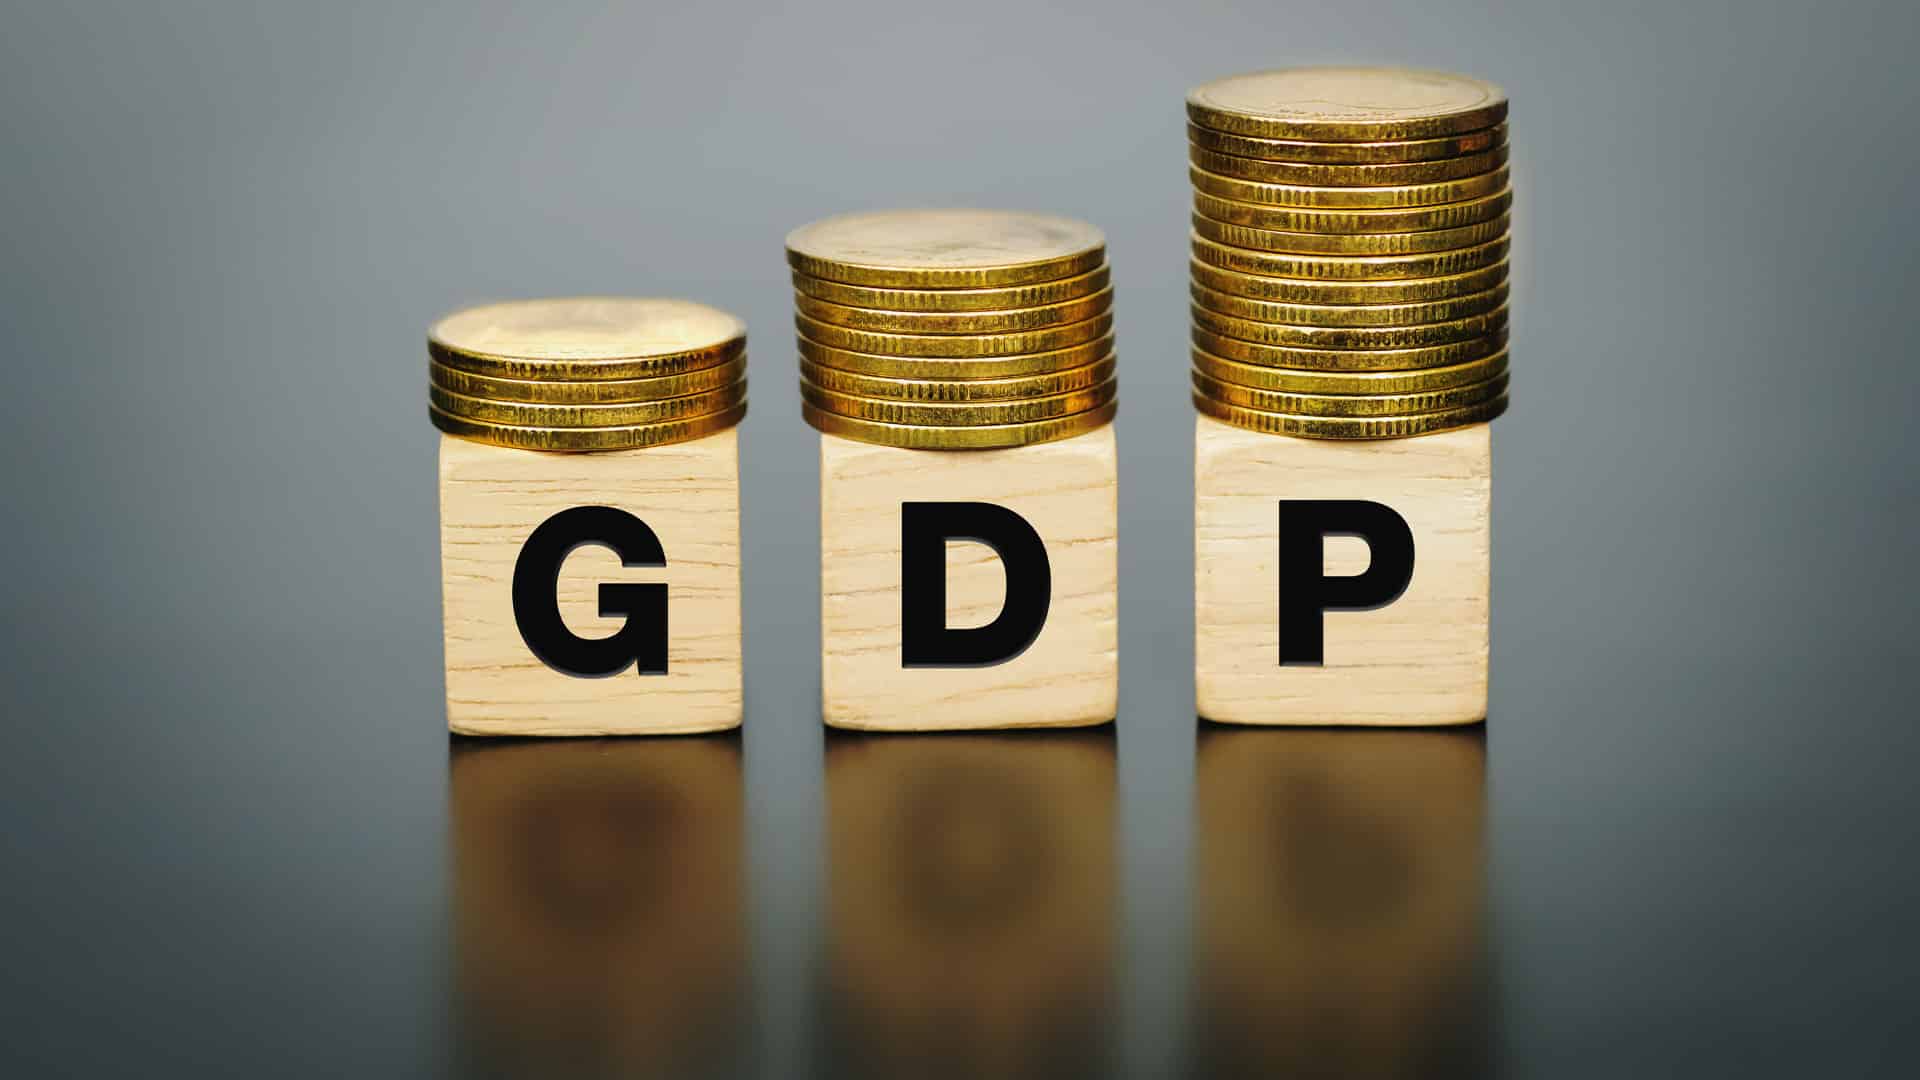 India's GDP likely grew 5-5.1 pc in third quarter of FY23: Analysts